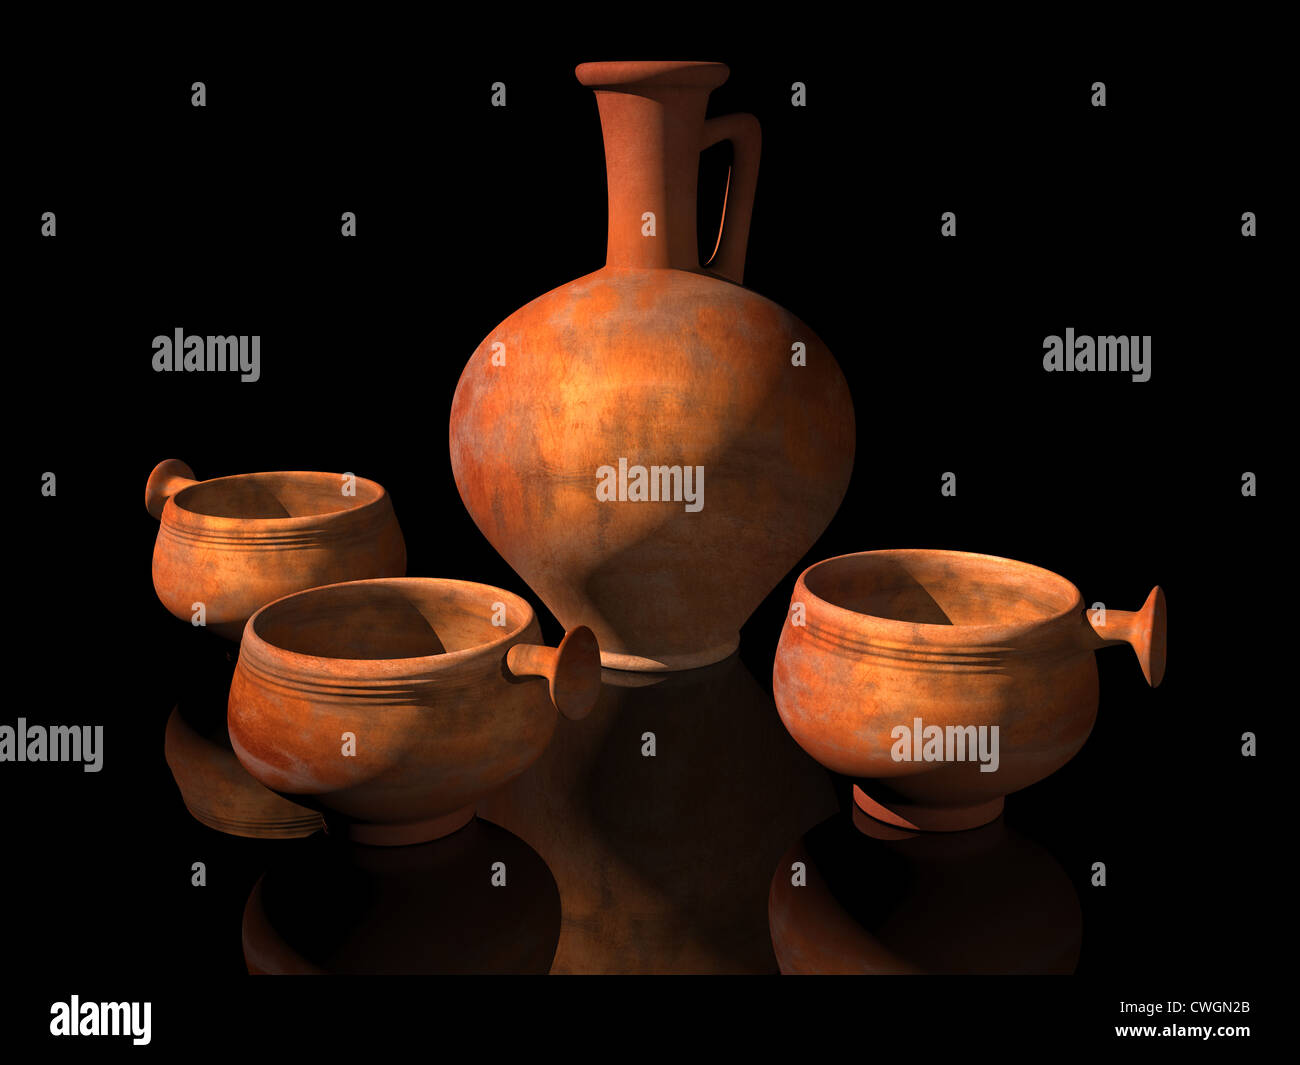 Illustration of ancient Roman dippers or drinking cups with a wine jug Stock Photo